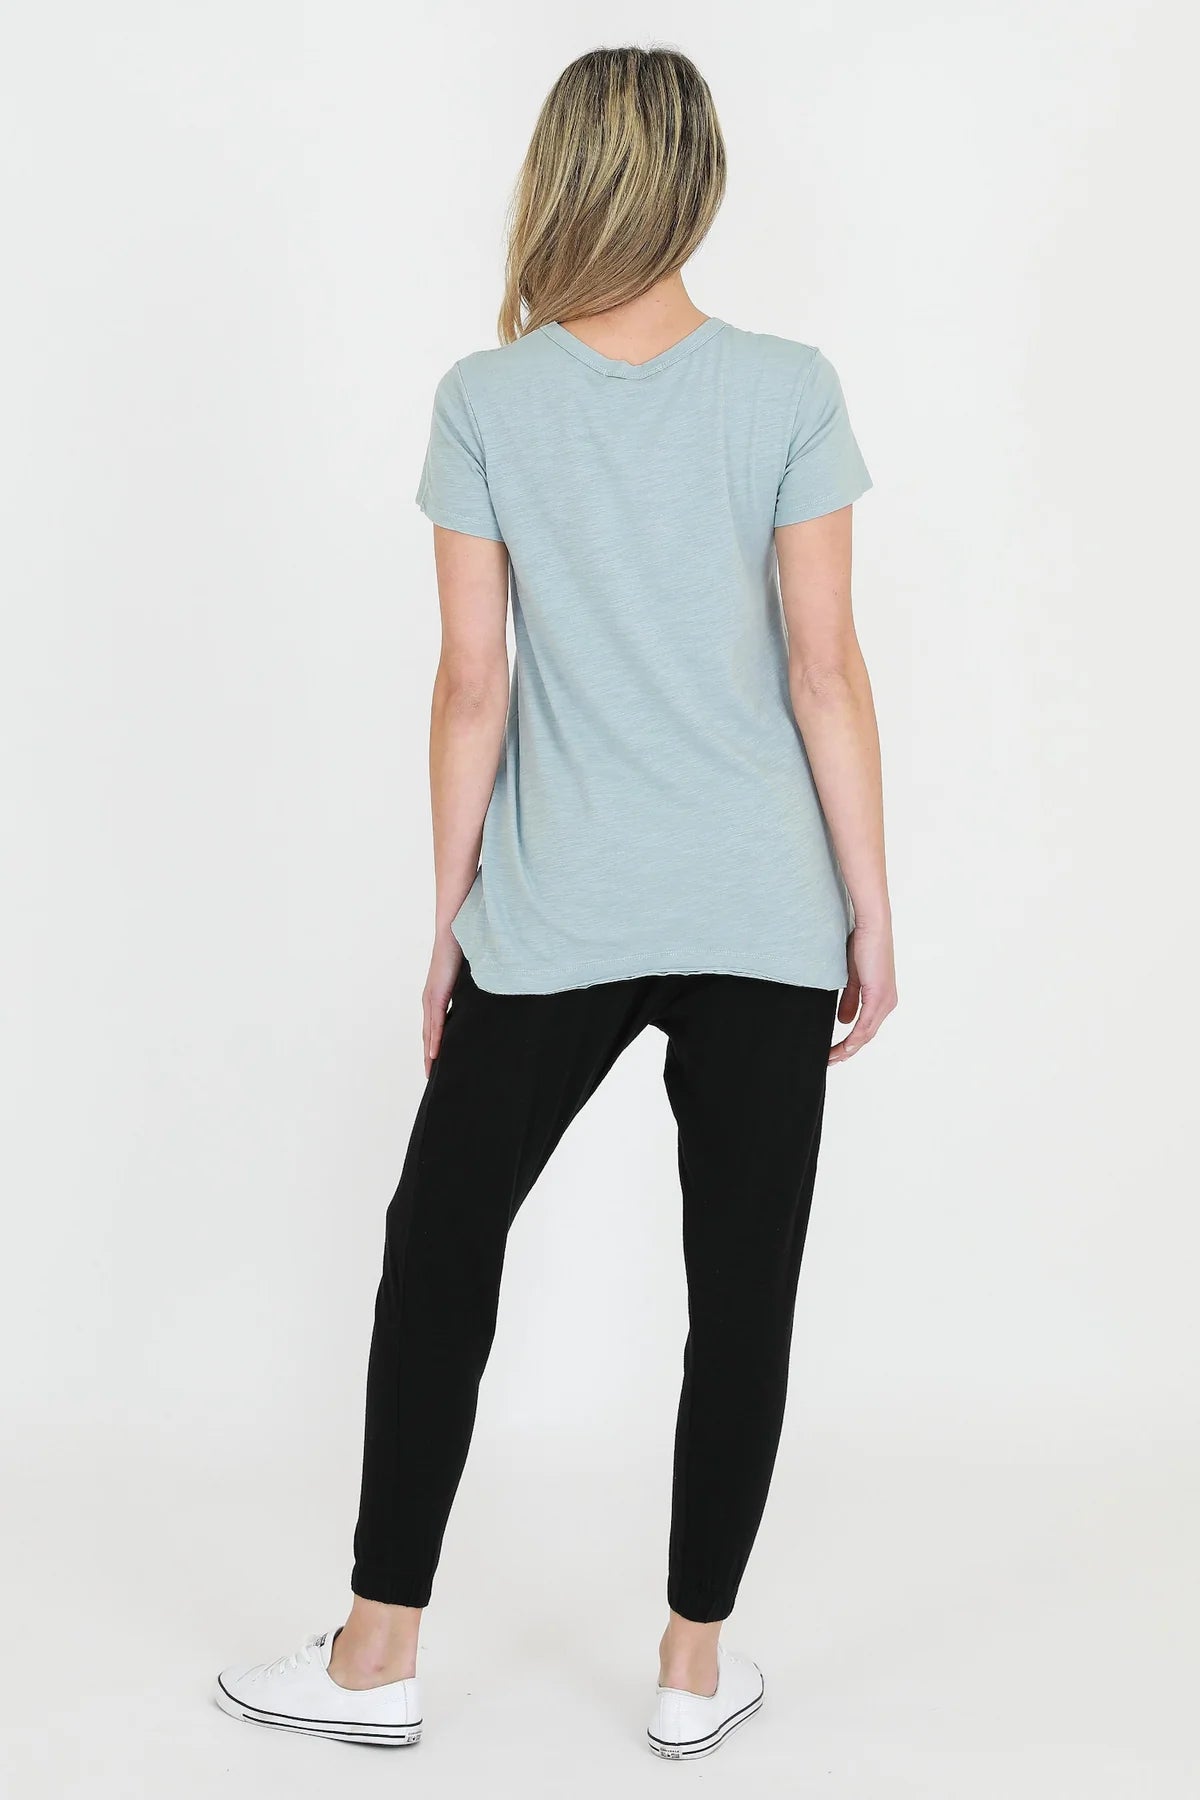 3rd Story - Thornton Tee in Mint Blue